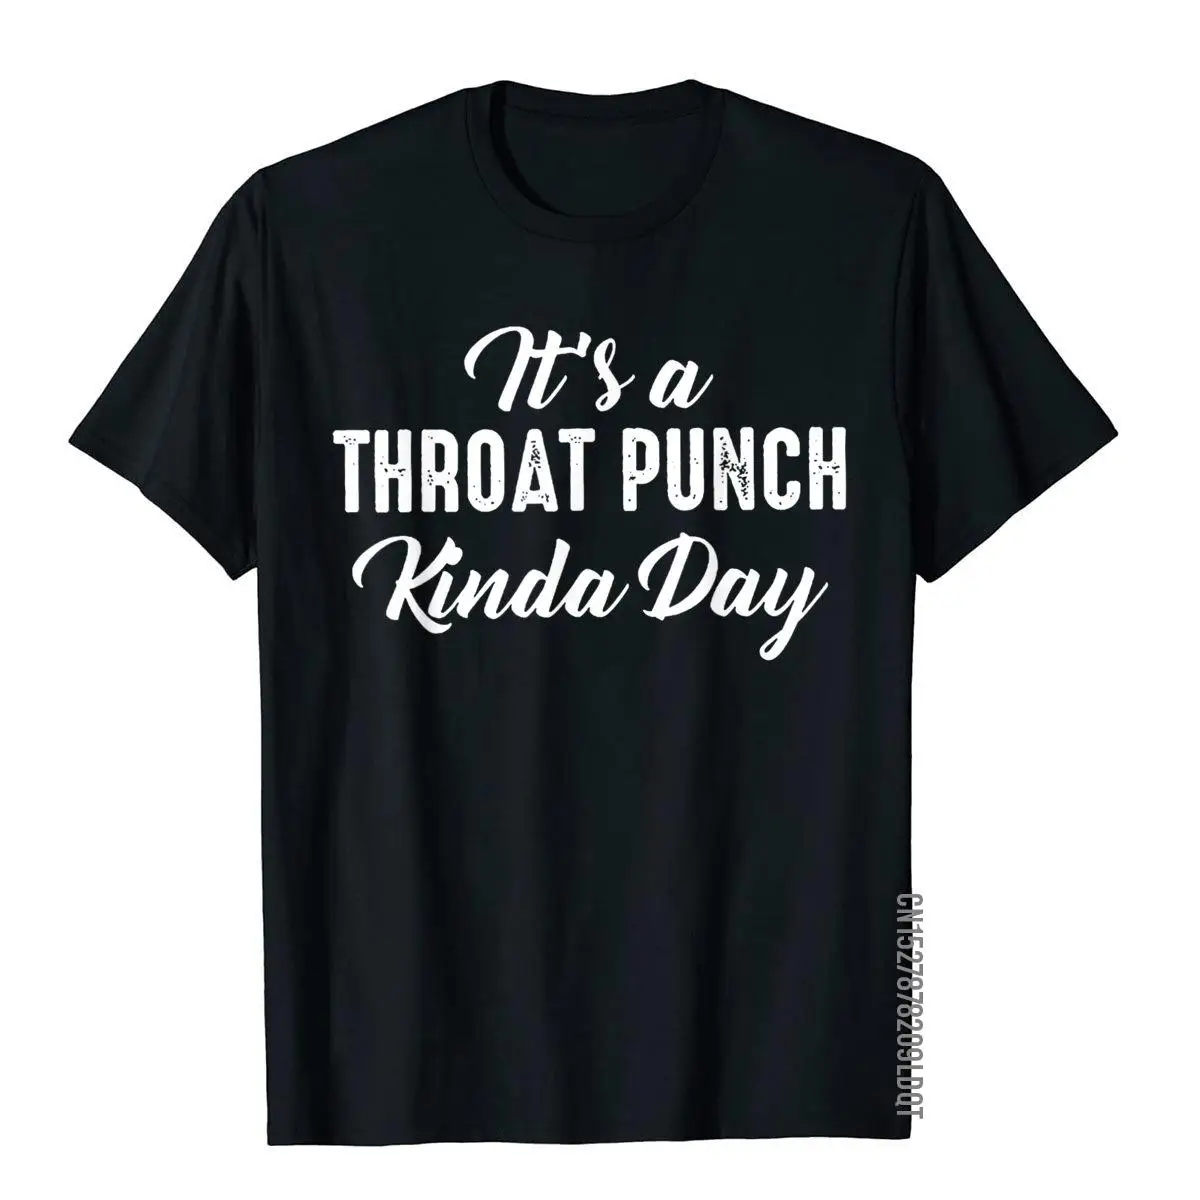 It's A Throat Punch Kinda Day T-Shirt For Men Short Sleeve Crewneck 100% Cotton Men's Clothing Funny Streetwear